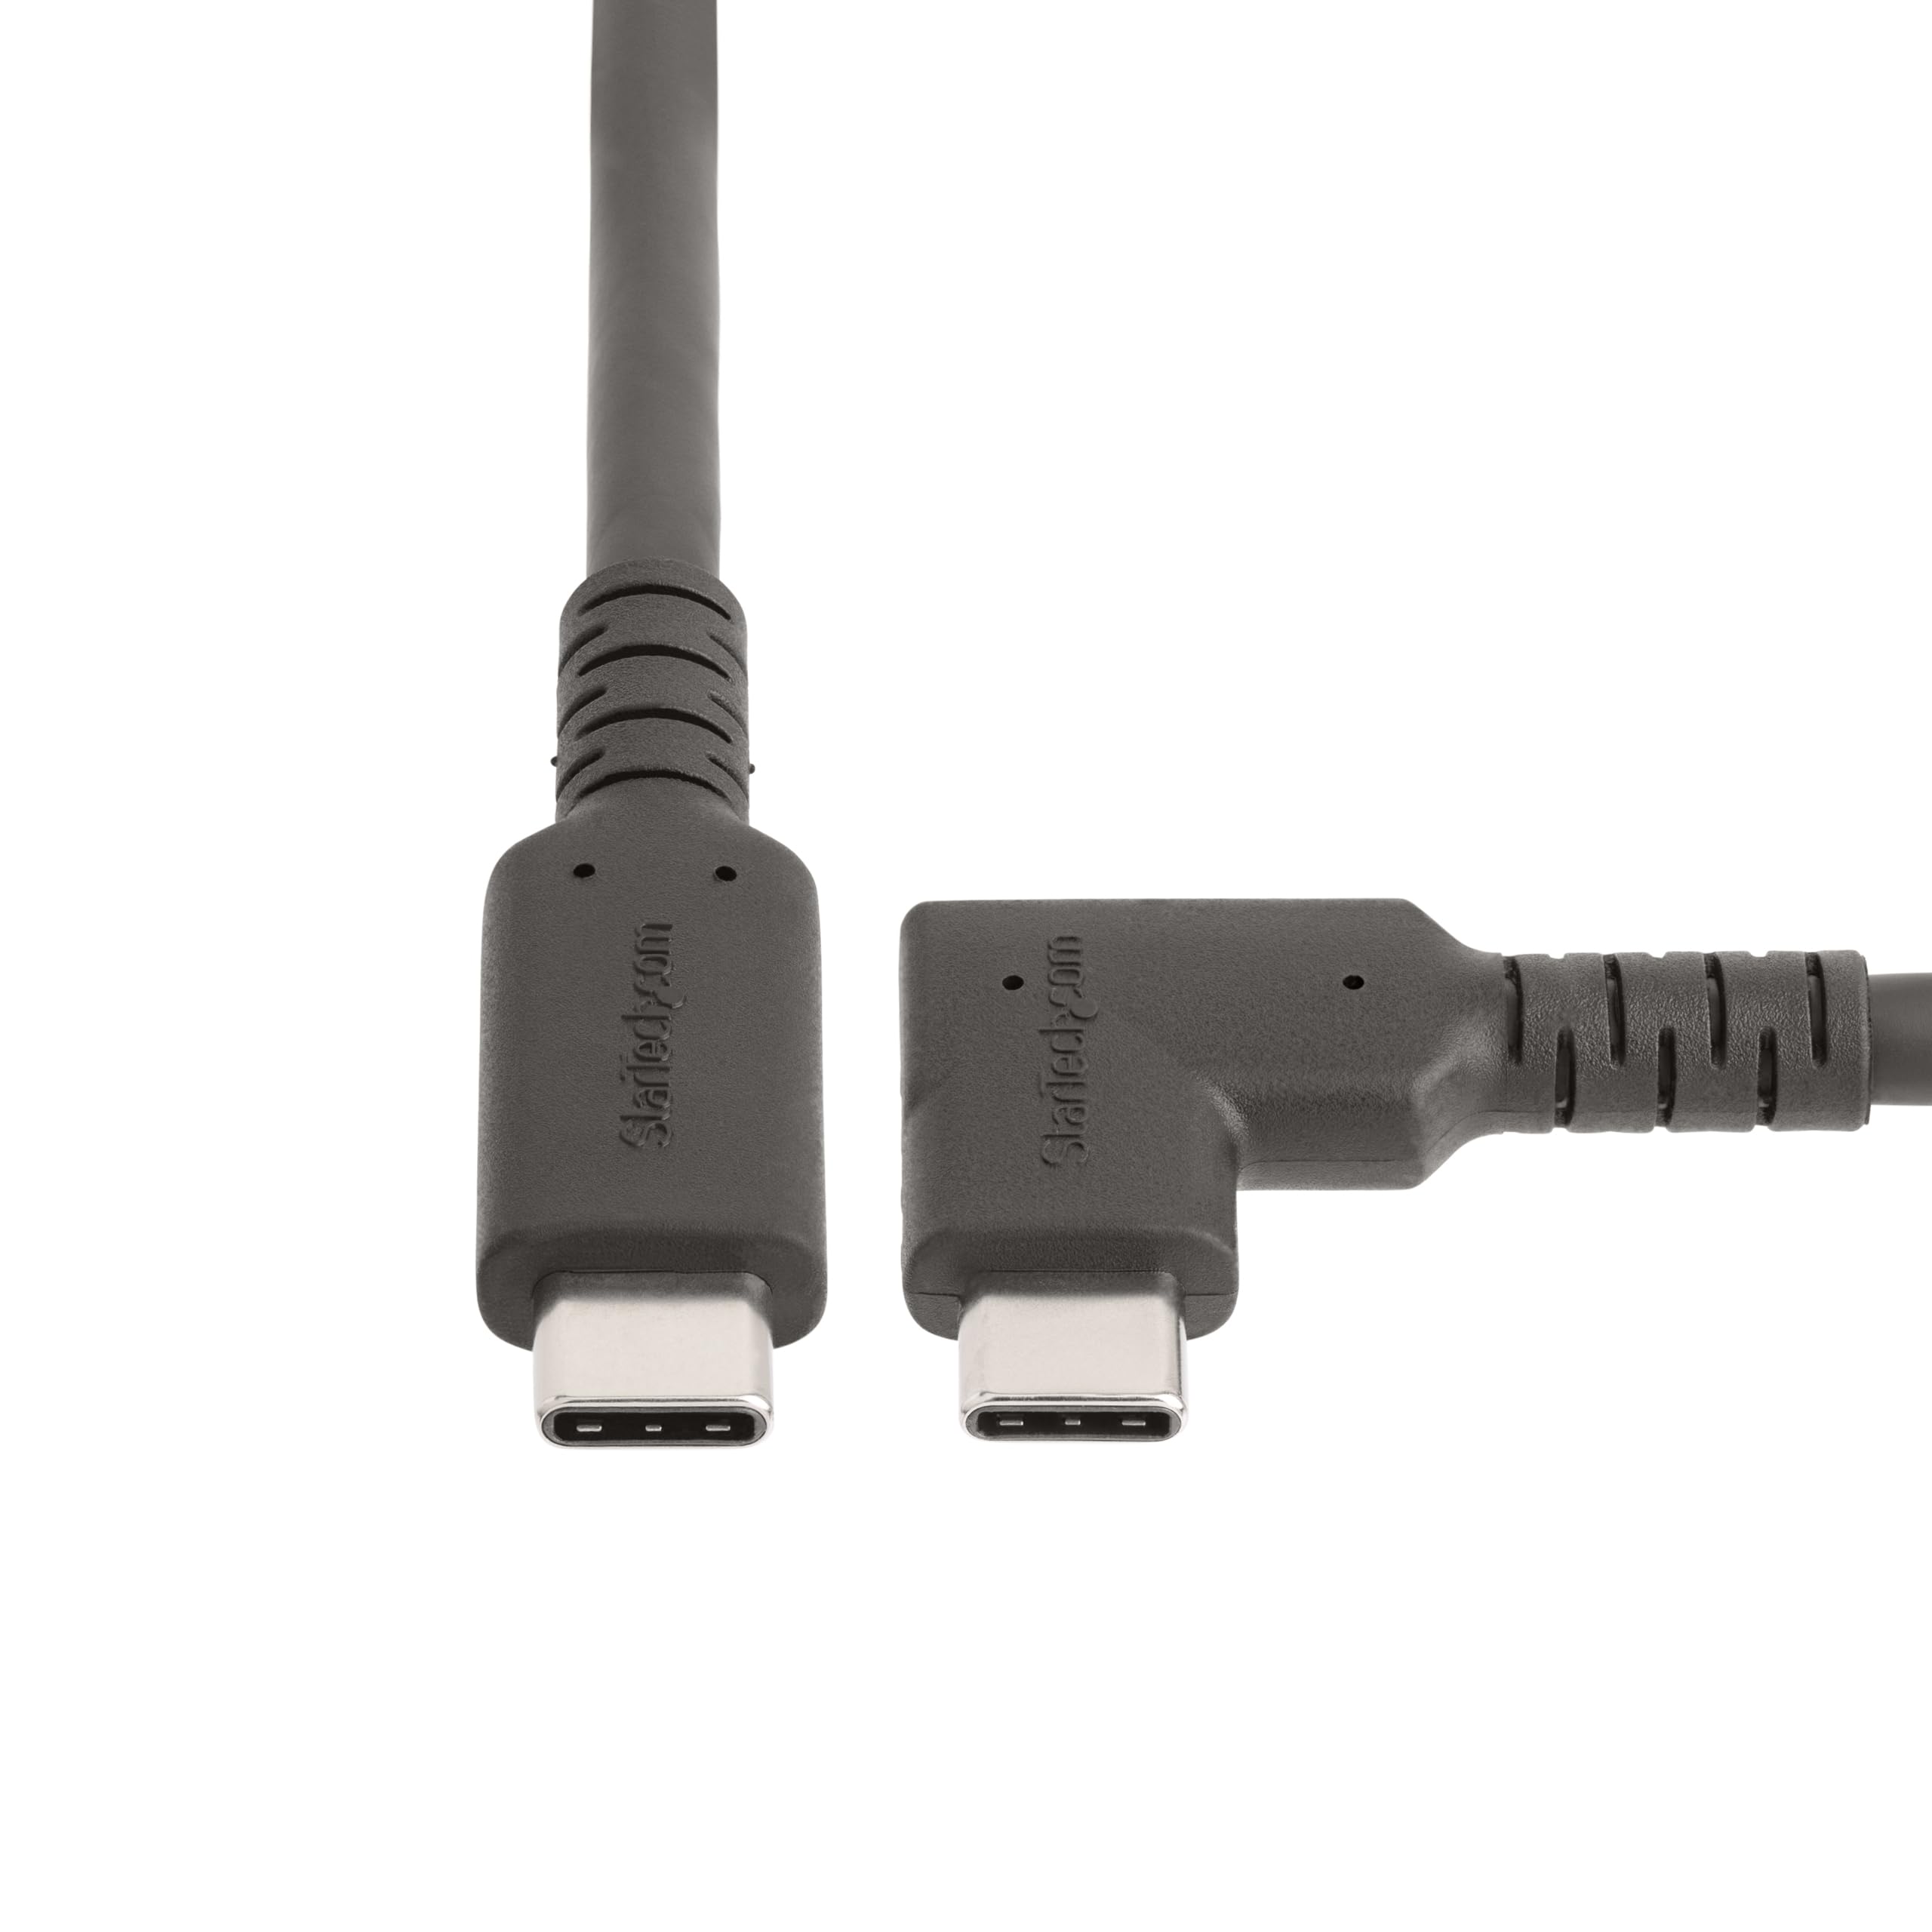 StarTech.com 1.6ft (50cm) Rugged Right Angle USB-C Cable, USB 3.2 Gen 2 (10 Gbps), USB C to C Data Transfer Cable, 4K 60Hz DP Alt Mode, 100W PD - 90 Degree USB Type-C Cable (RUSB31CC50CMBR)